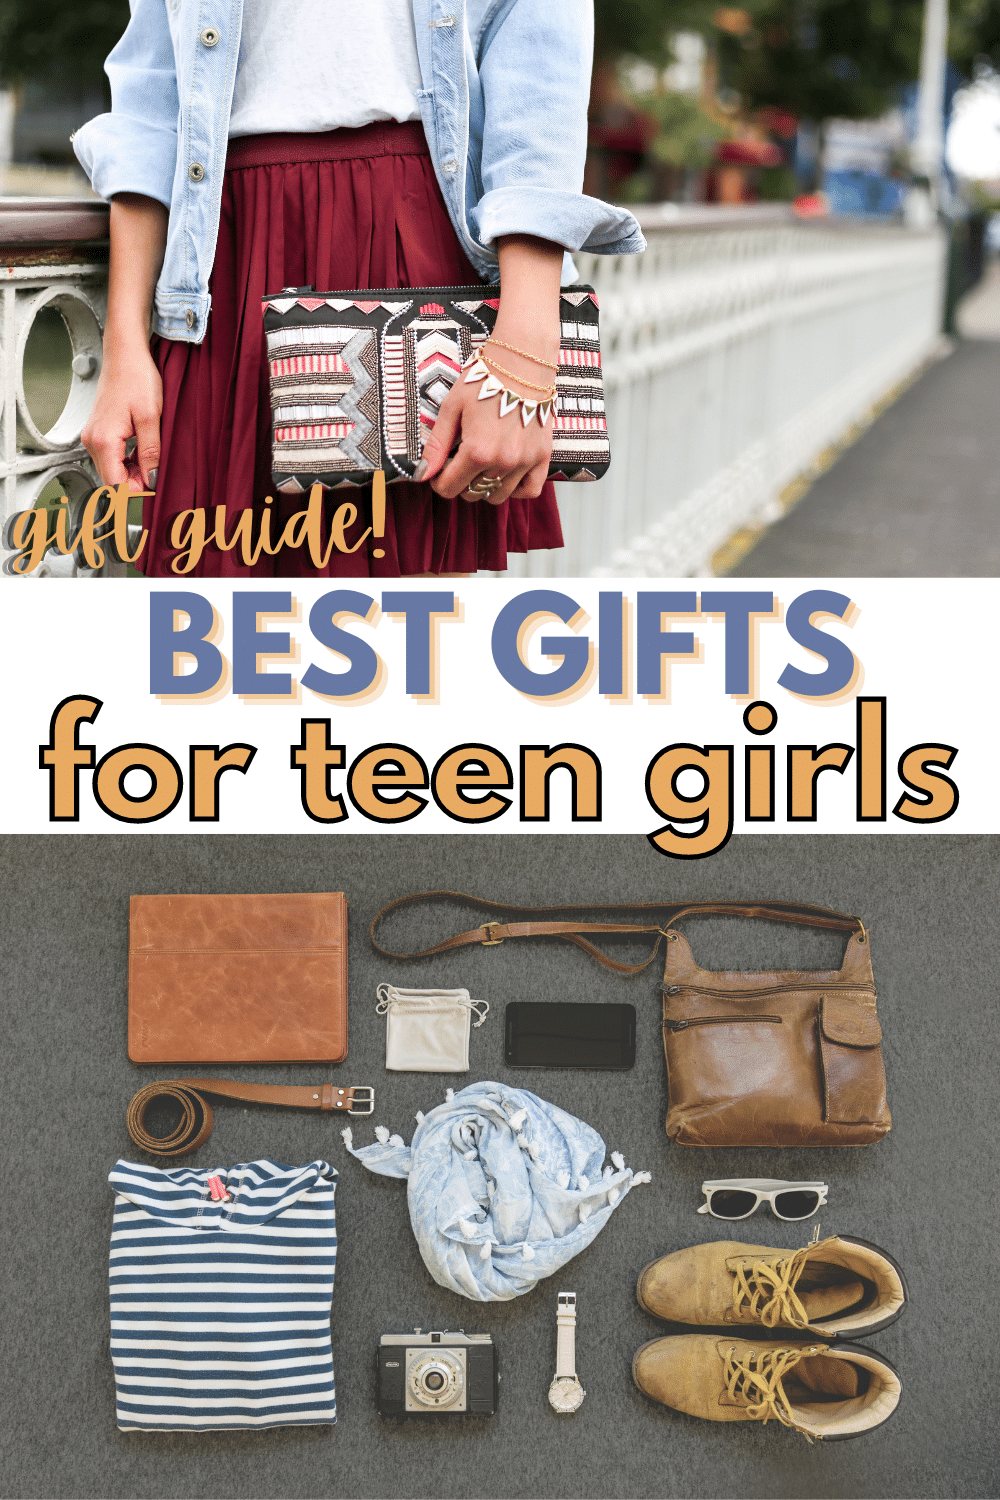 Best gifts for teen girls. Whether you're searching for the perfect birthday present or holiday gift, we have an excellent selection of options specifically tailored to suit the preferences and interests of teen girls. Our collection